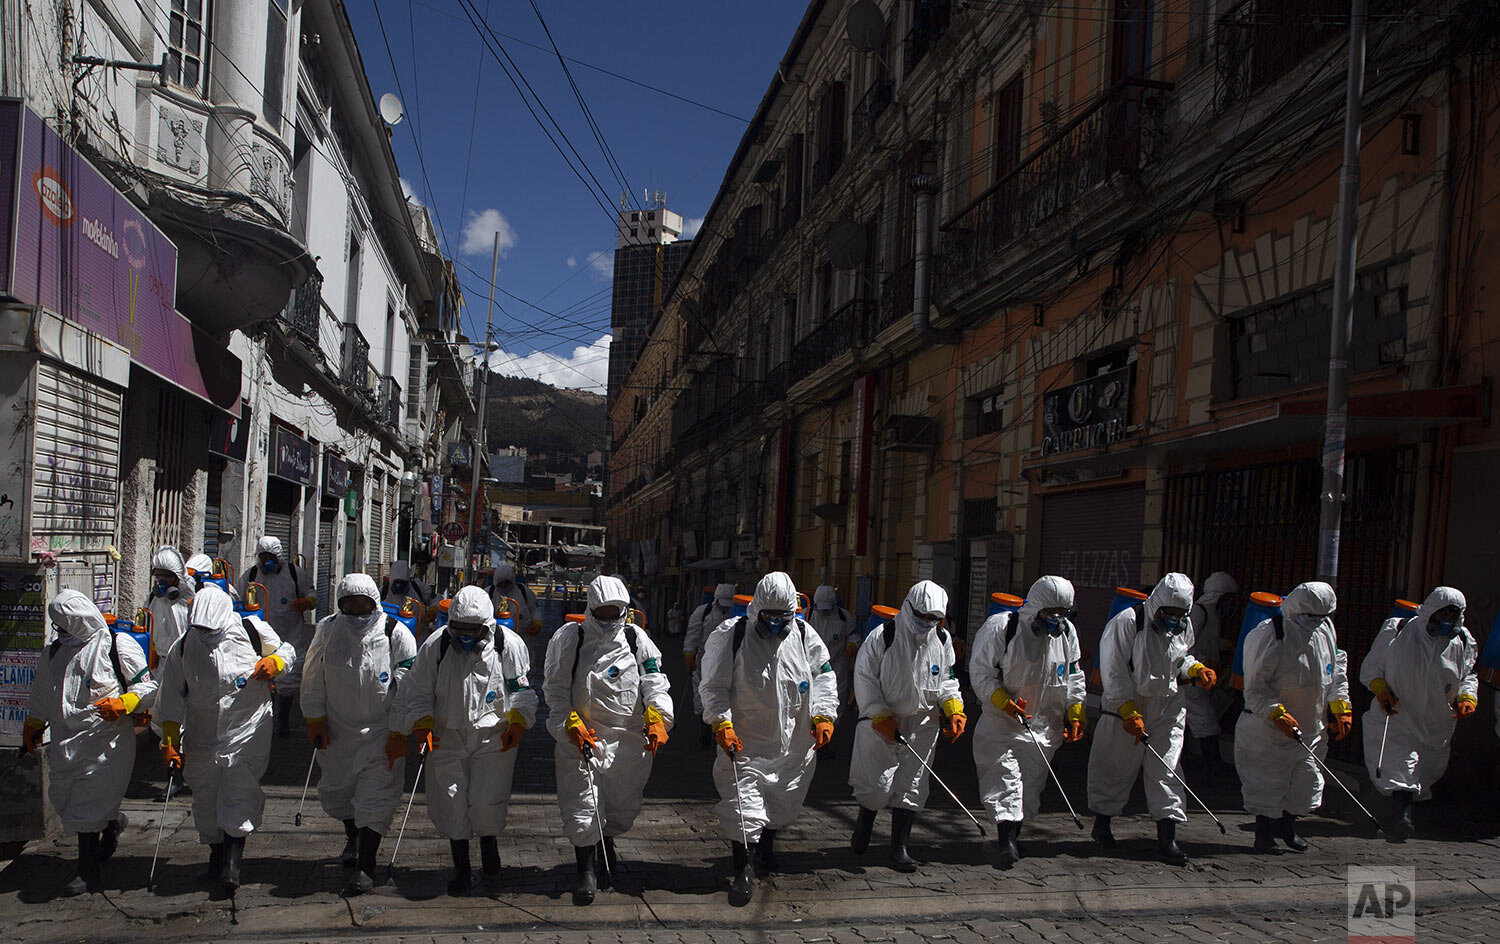  City workers fumigate a street to help contain the spread of COVID-19 in La Paz, Bolivia, Thursday, April 2, 2020. (AP Photo/Juan Karita) 